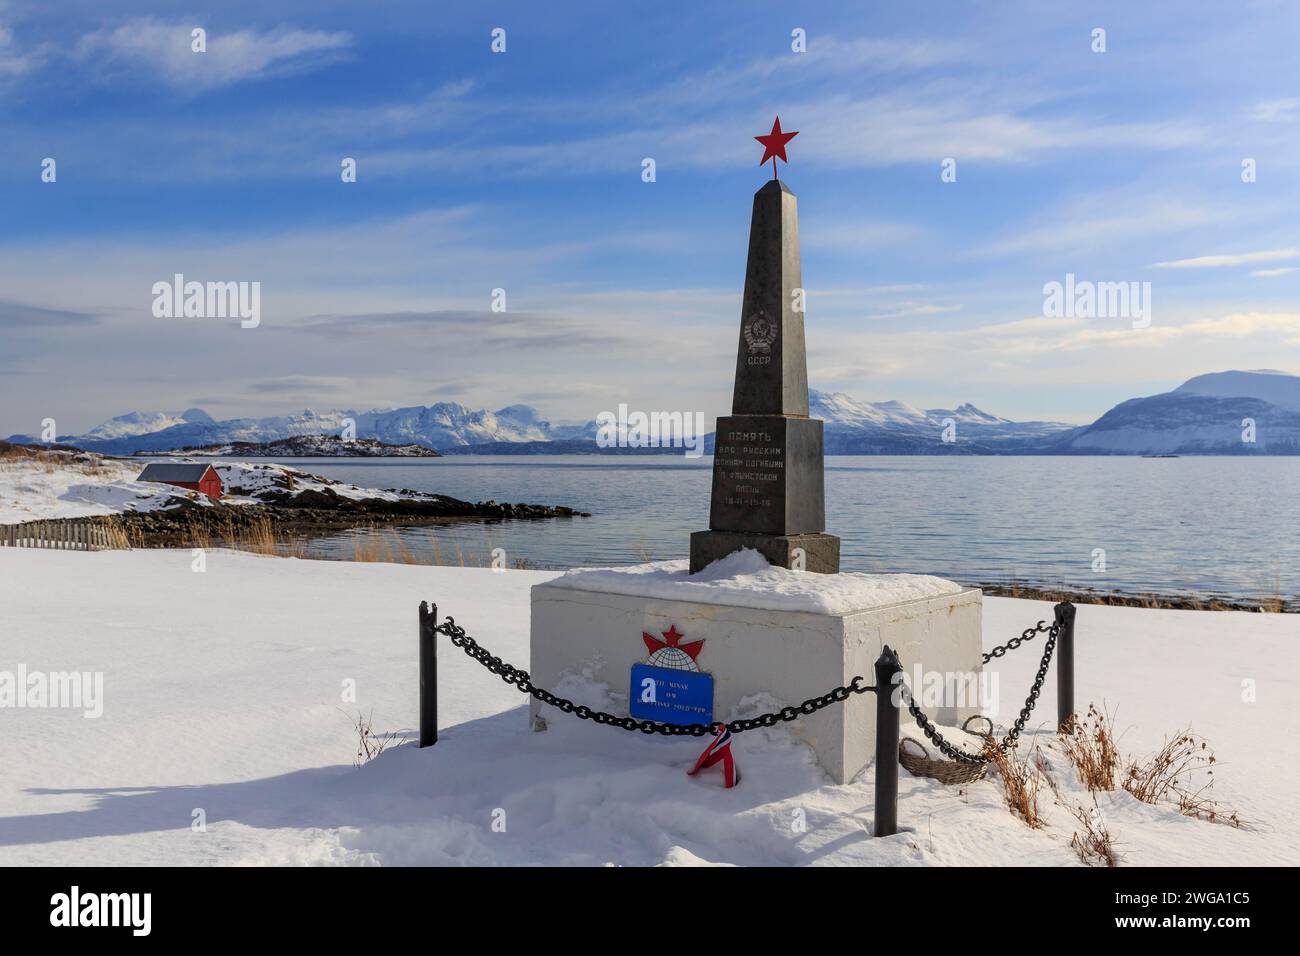 Memorial stone for the victims of the prison camp in World War II, Winter, Harstad, Troms og Finnmark, Norway Stock Photo